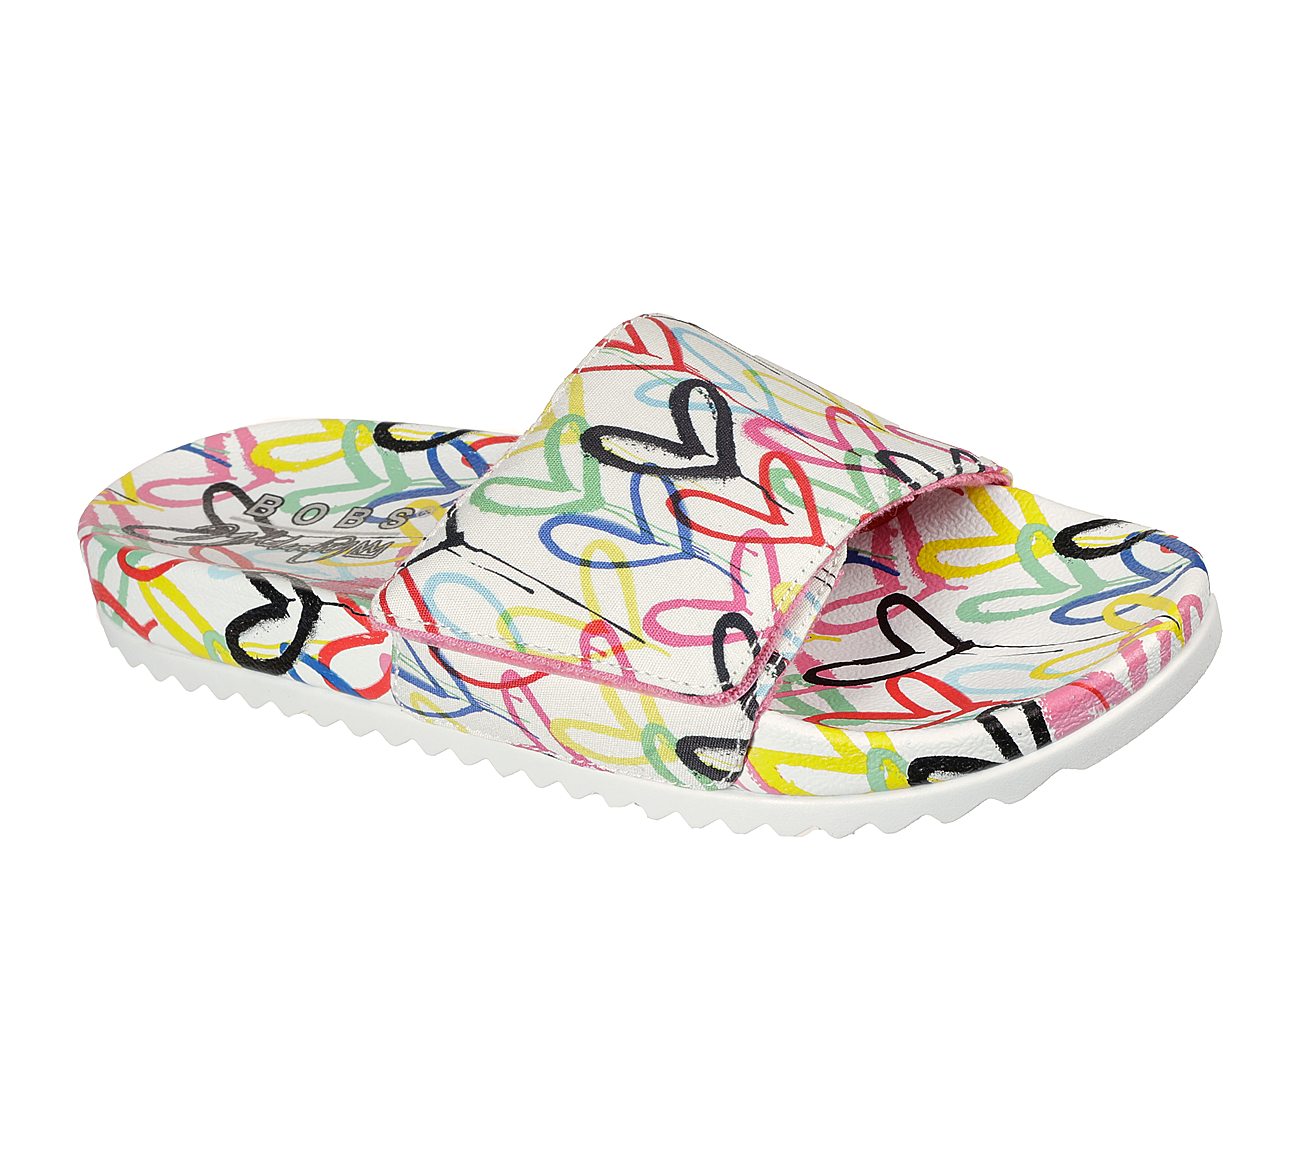 POP UPS 2-LOVE & SUMMER, WHITE/MULTI Footwear Lateral View